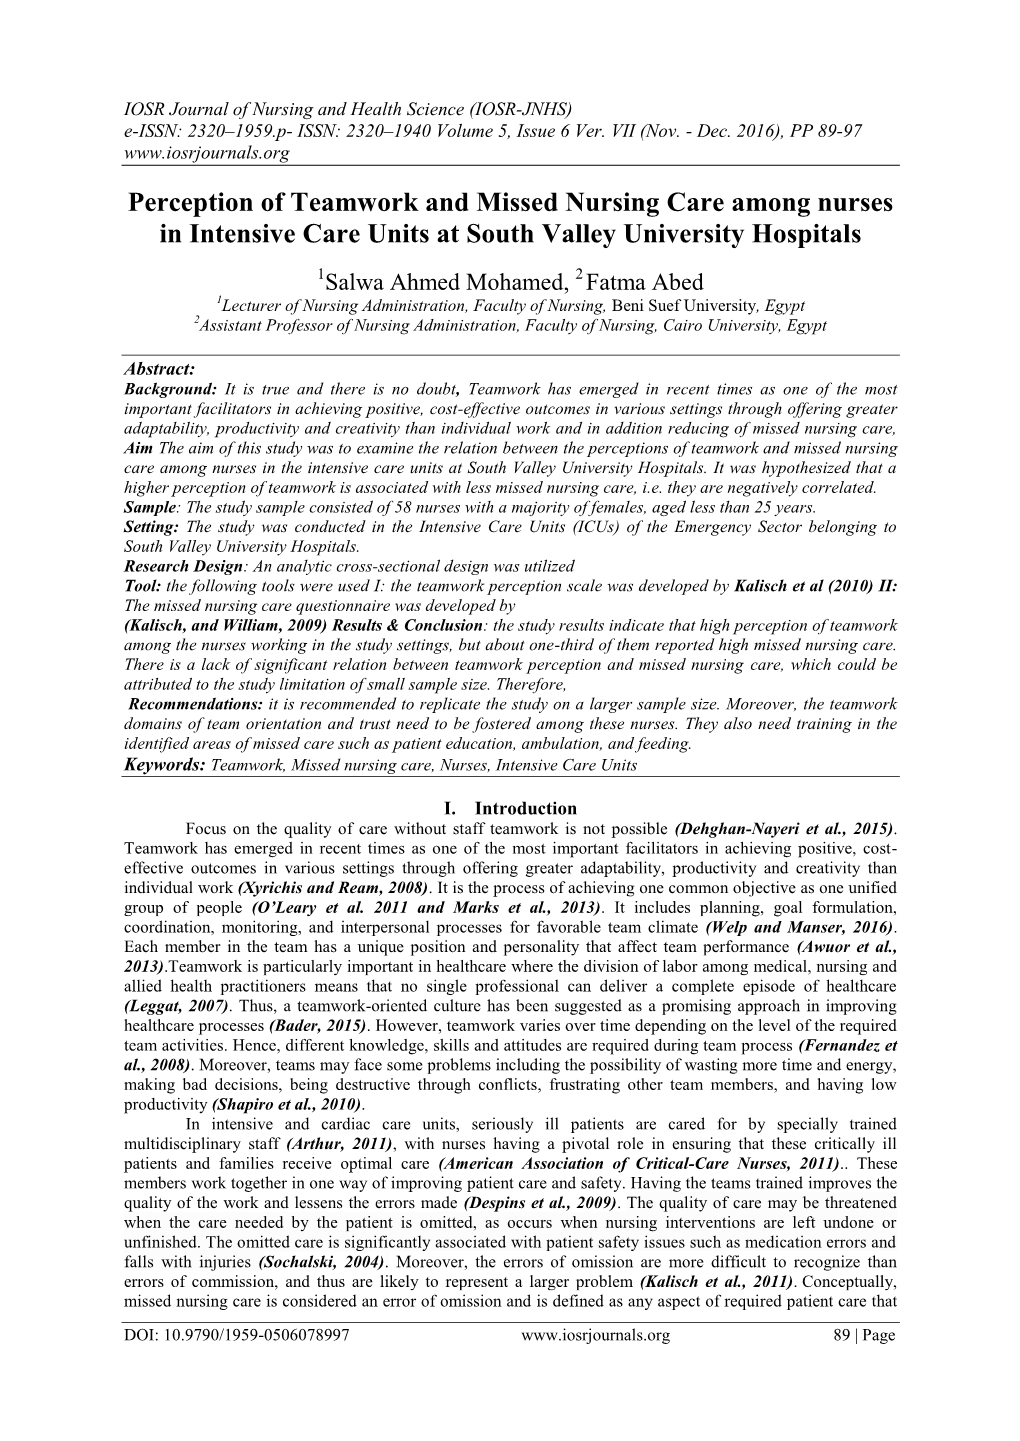 Perception of Teamwork and Missed Nursing Care Among Nurses in Intensive Care Units at South Valley University Hospitals